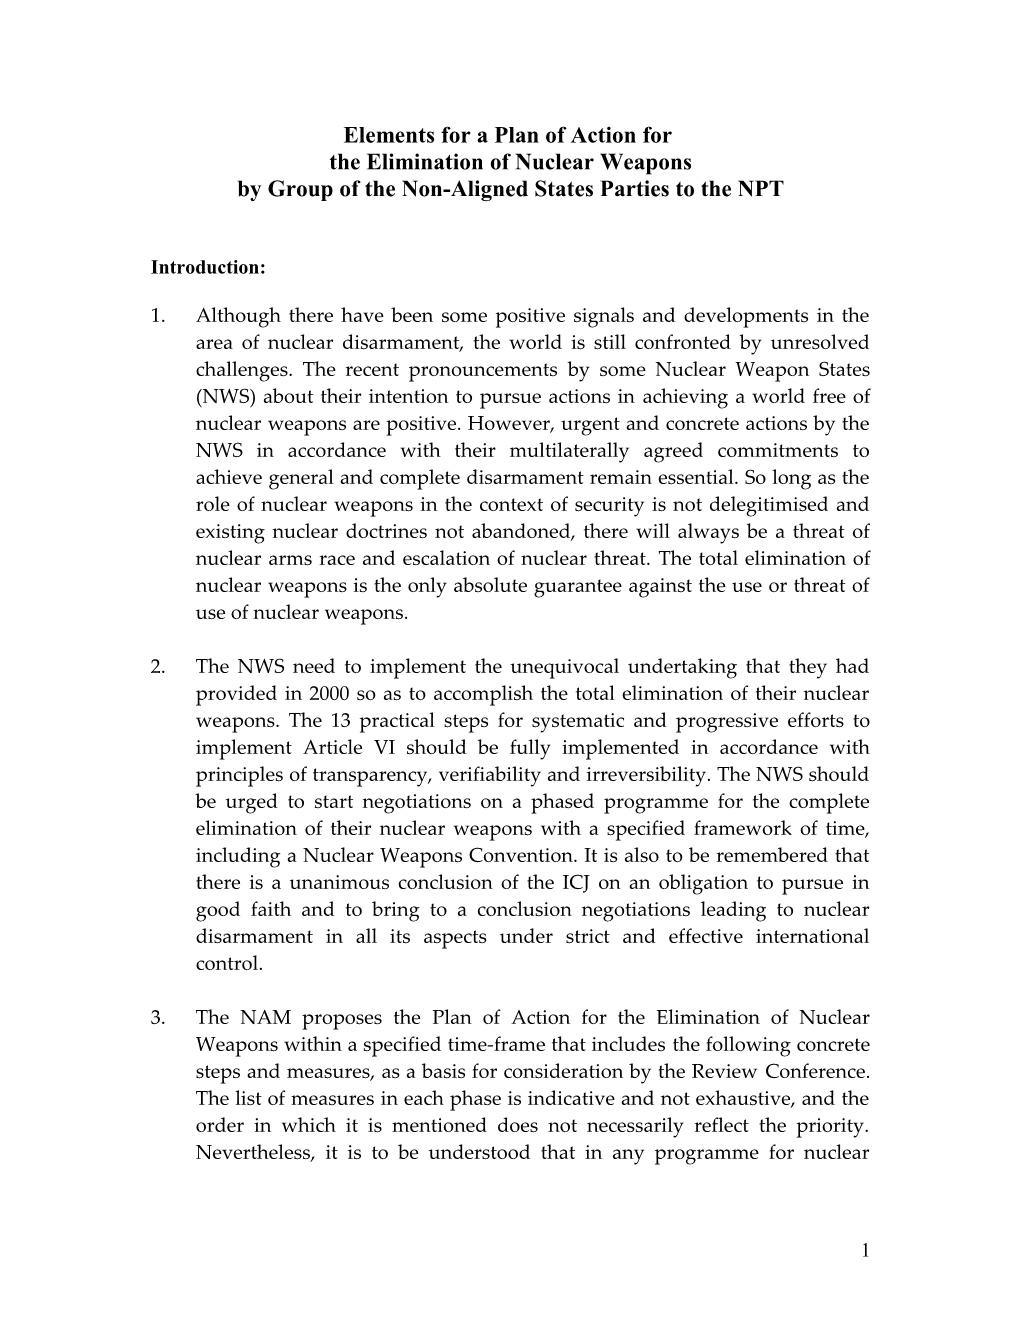 Proposal for a Programme of Action for the Elimination of Nuclear Weapons